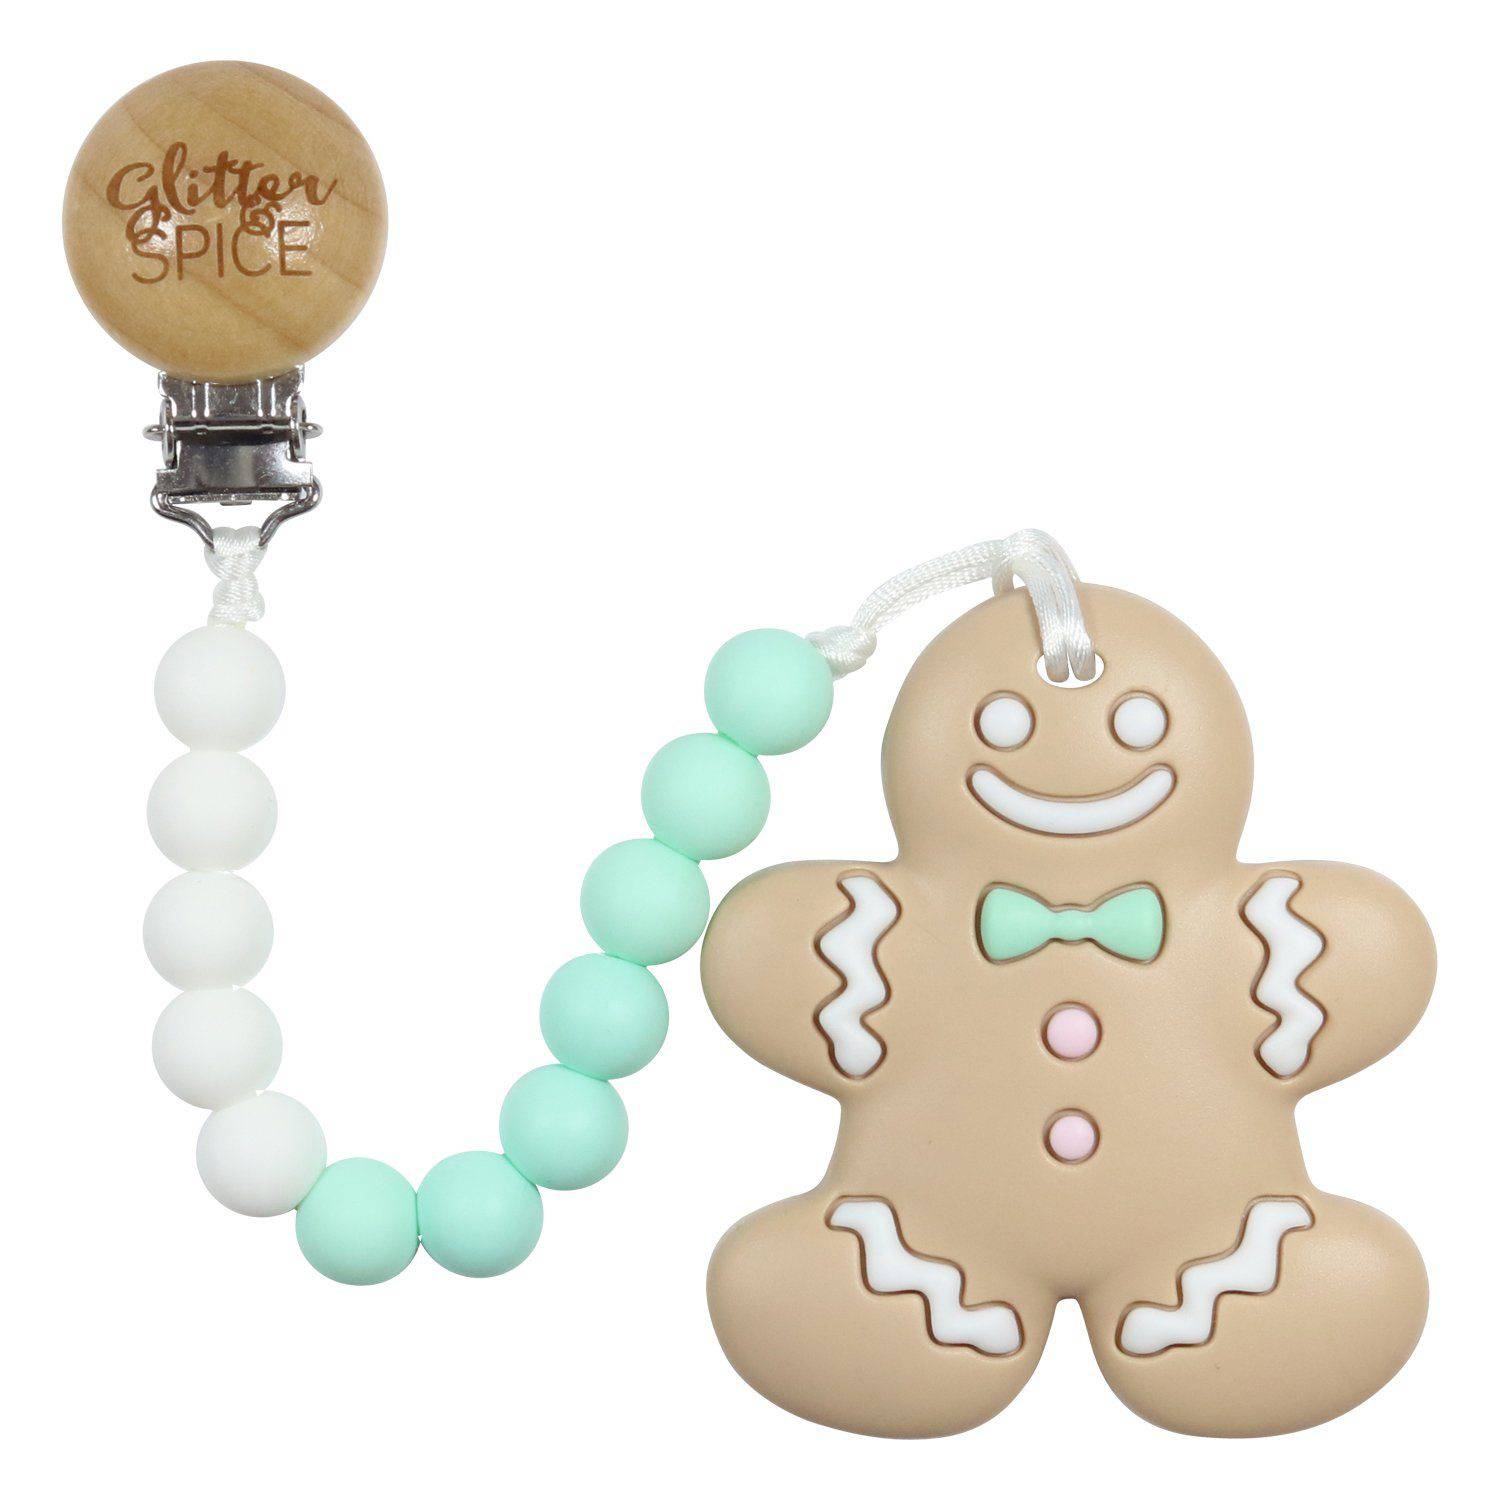 Glitter & Spice Gingerbread Silicone Teether with Pacifier Clip - Mint Glitter & Spice Gingerbread Silicone Teether with Pacifier Clip - Mint 